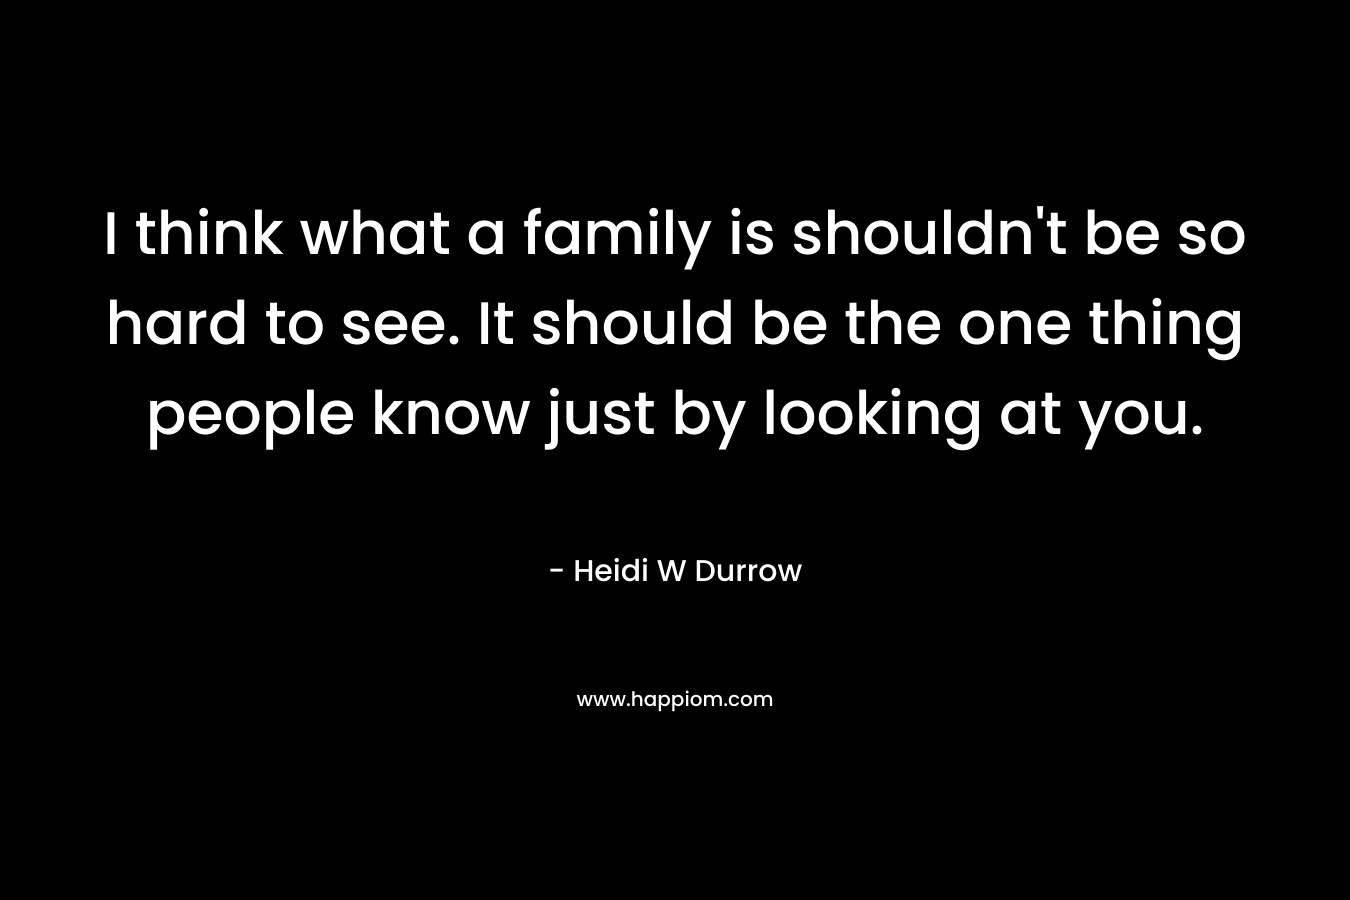 I think what a family is shouldn't be so hard to see. It should be the one thing people know just by looking at you.